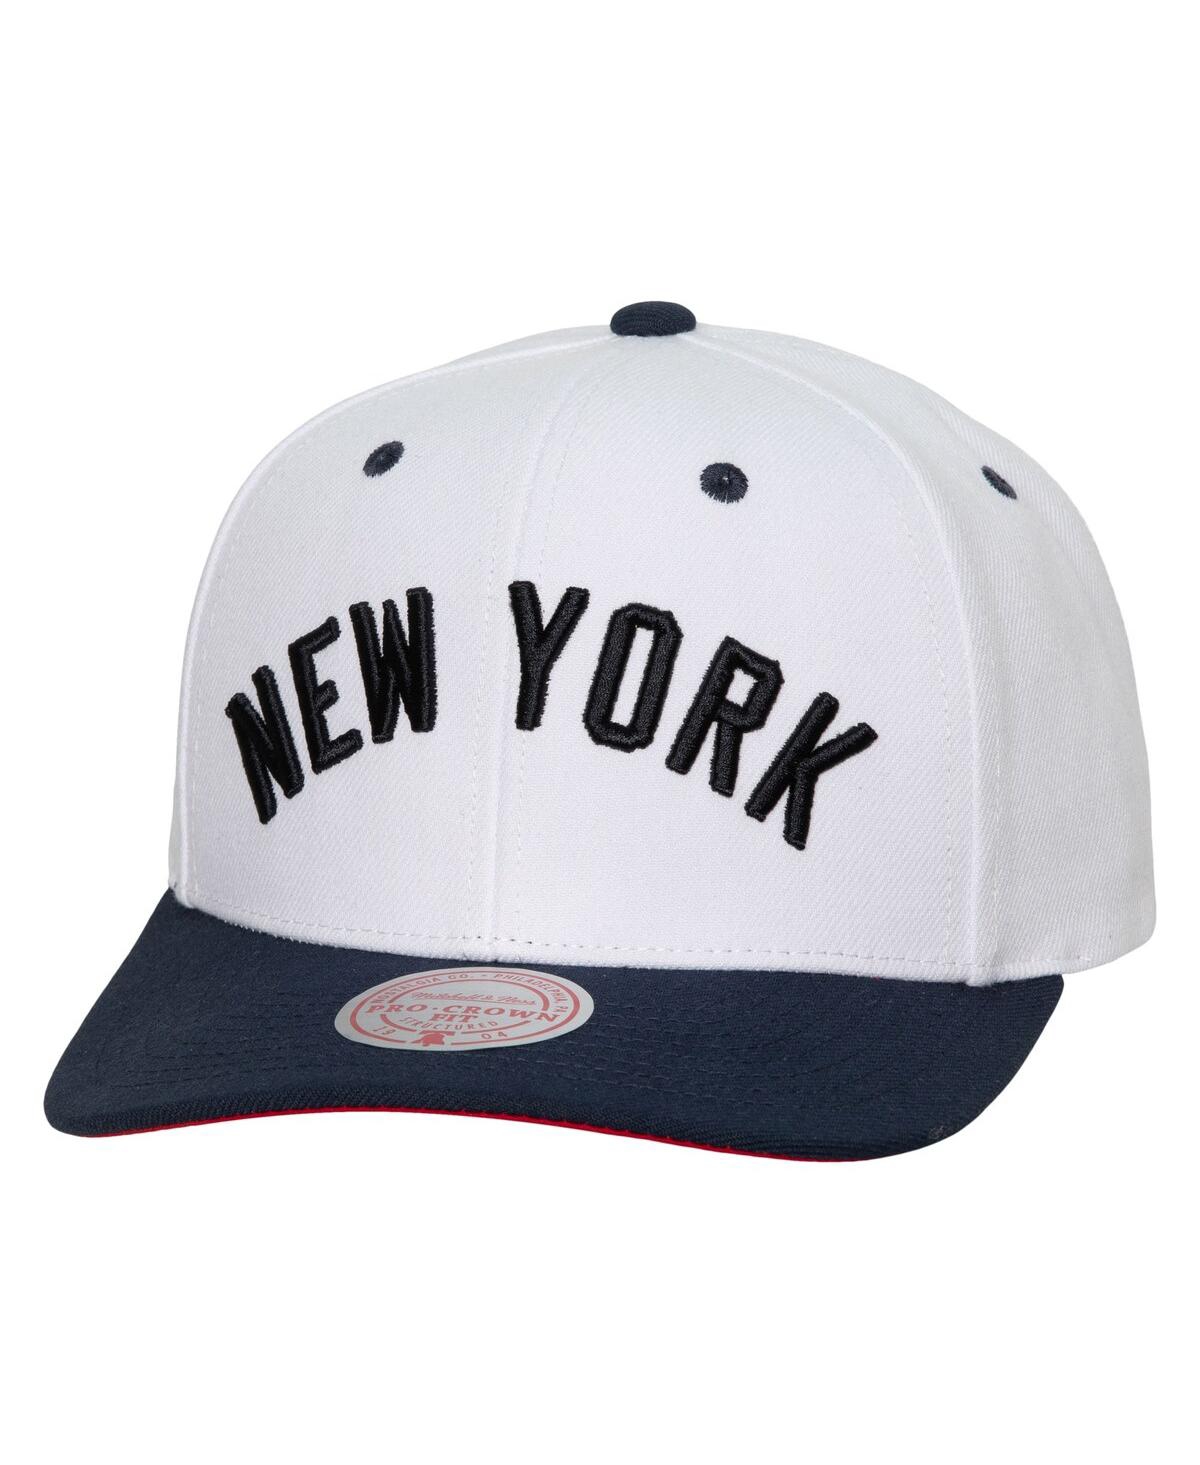 Mitchell & Ness Men's  White New York Yankees Cooperstown Collection Pro Crown Snapback Hat In White/navy